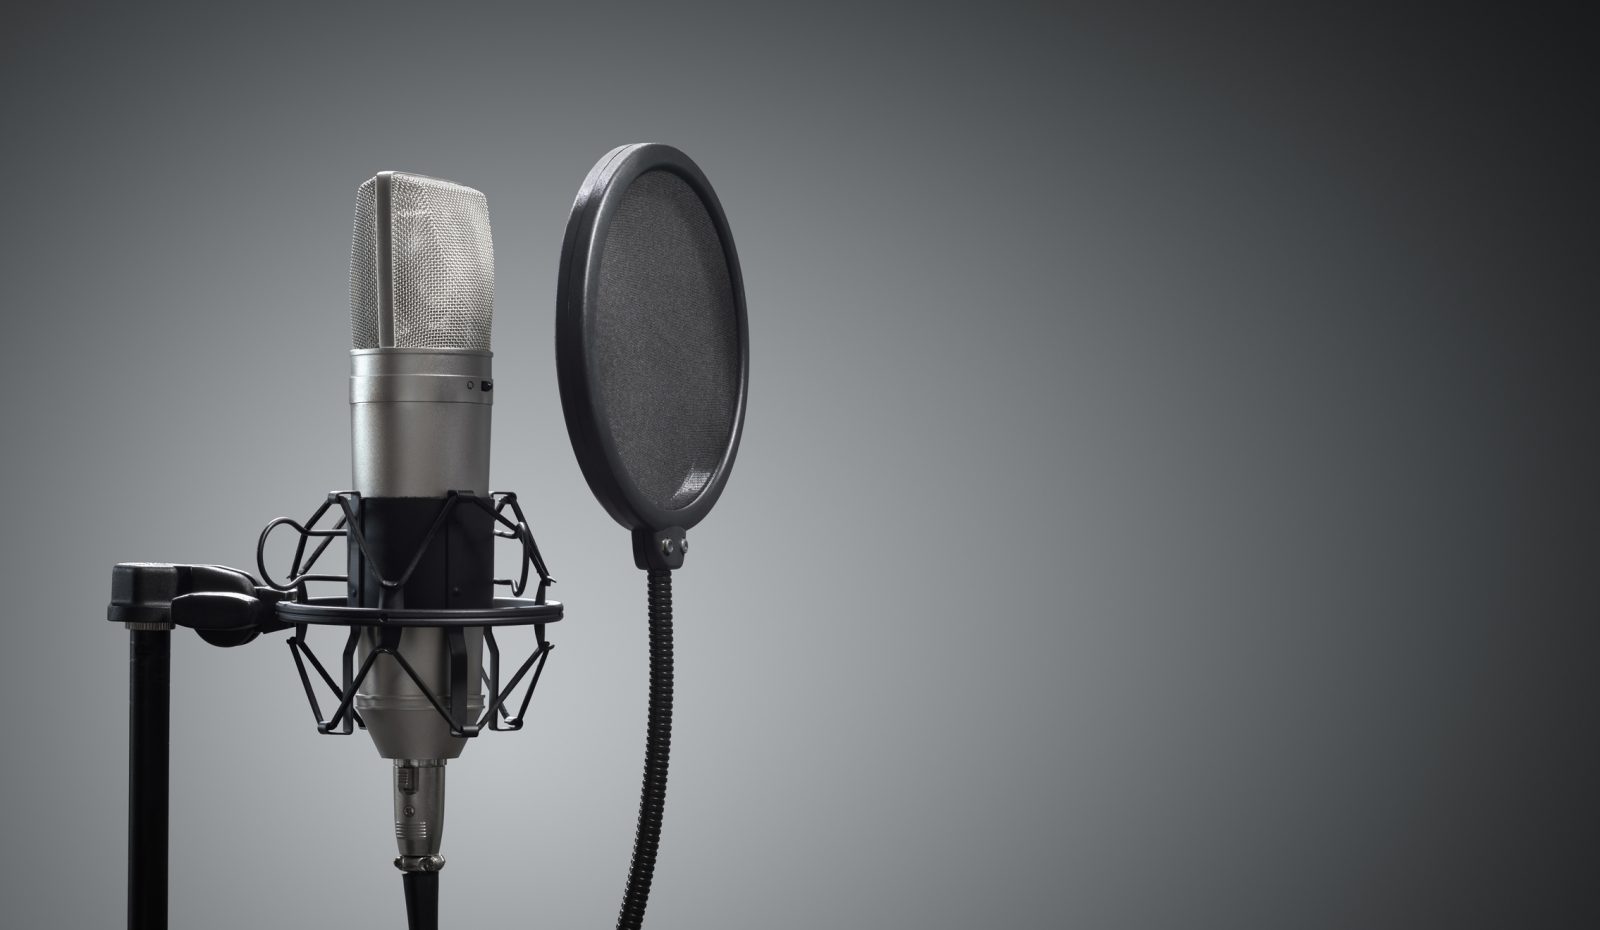 A studio microphone and pop shield on a mic stand against grey background.